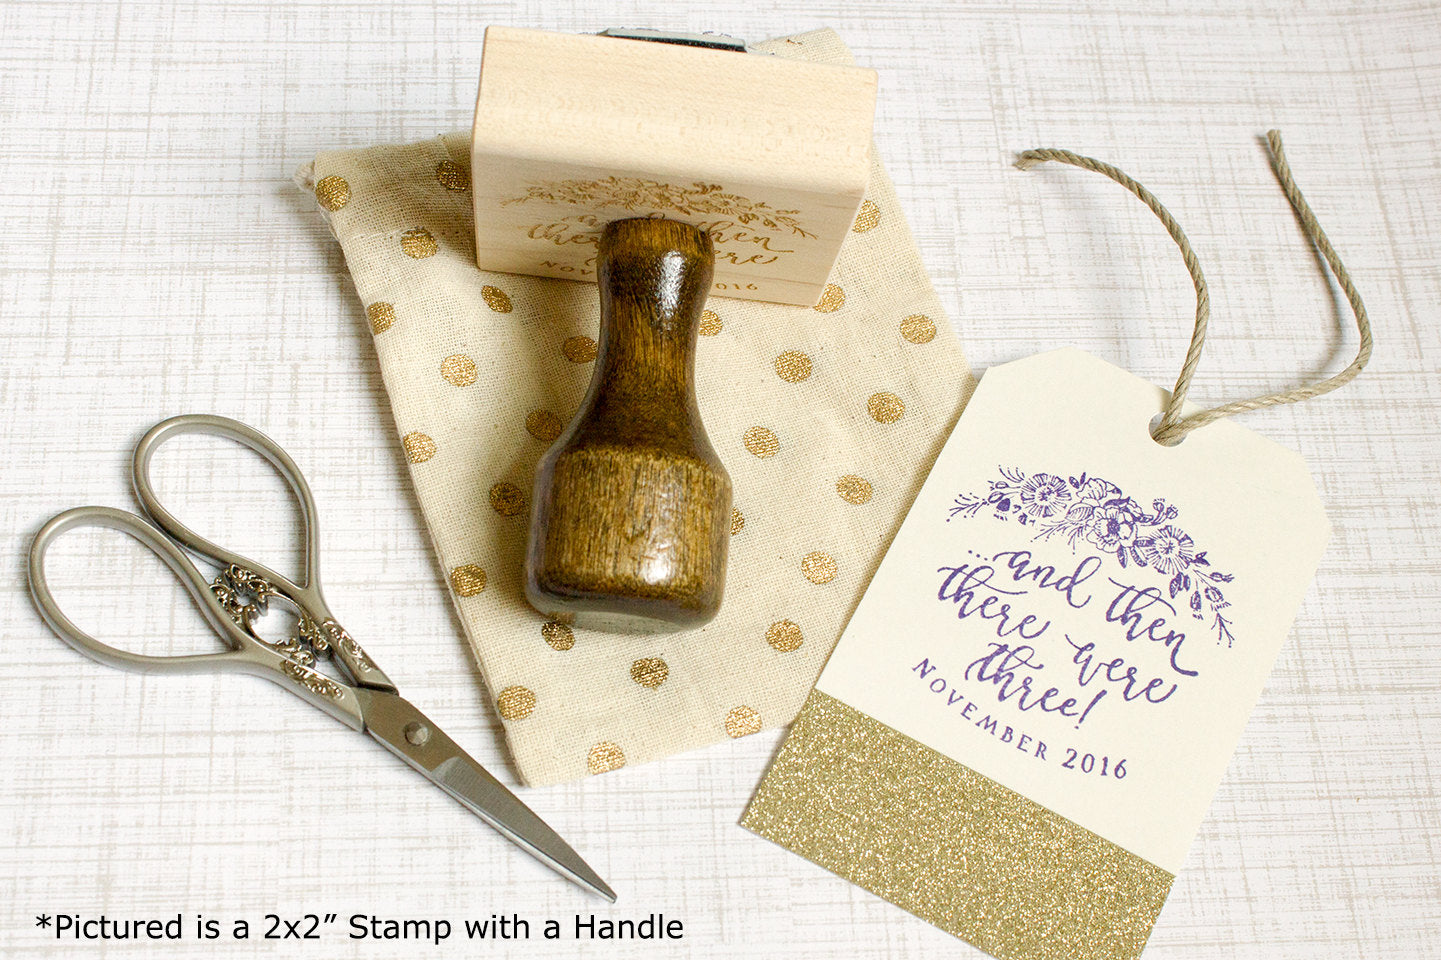 Wedding Rubber Stamp for Wedding Favors, Napkins, Cards. Custom Rubber Stamp, DIY Wedding Stamp, Botanical. Wedding Logo 2 to 4 Inch - W41